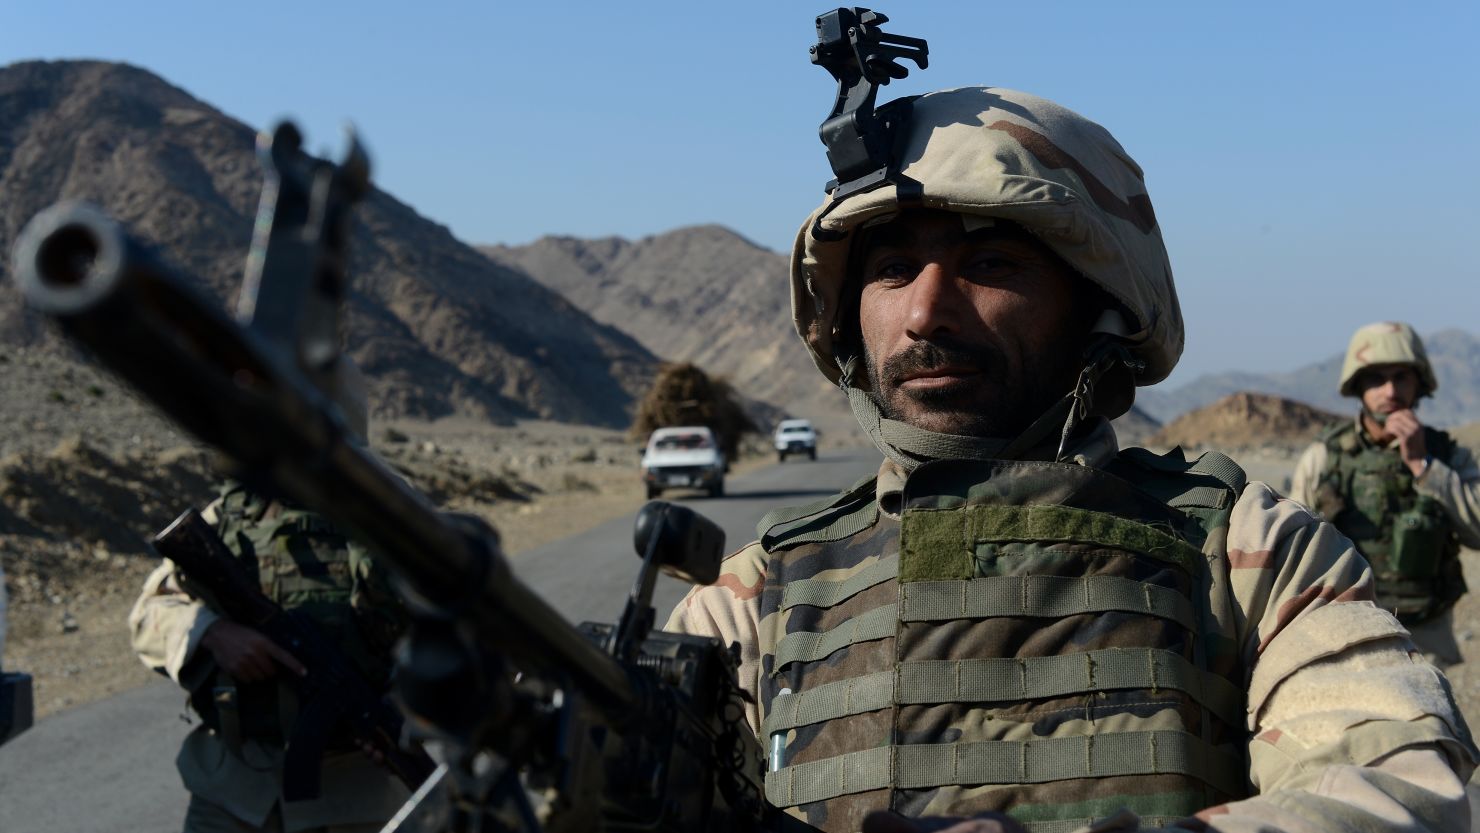 Afghan commando forces guard in Goshti district of Nangarhar province, bordering Pakistan on December 18, 2012.